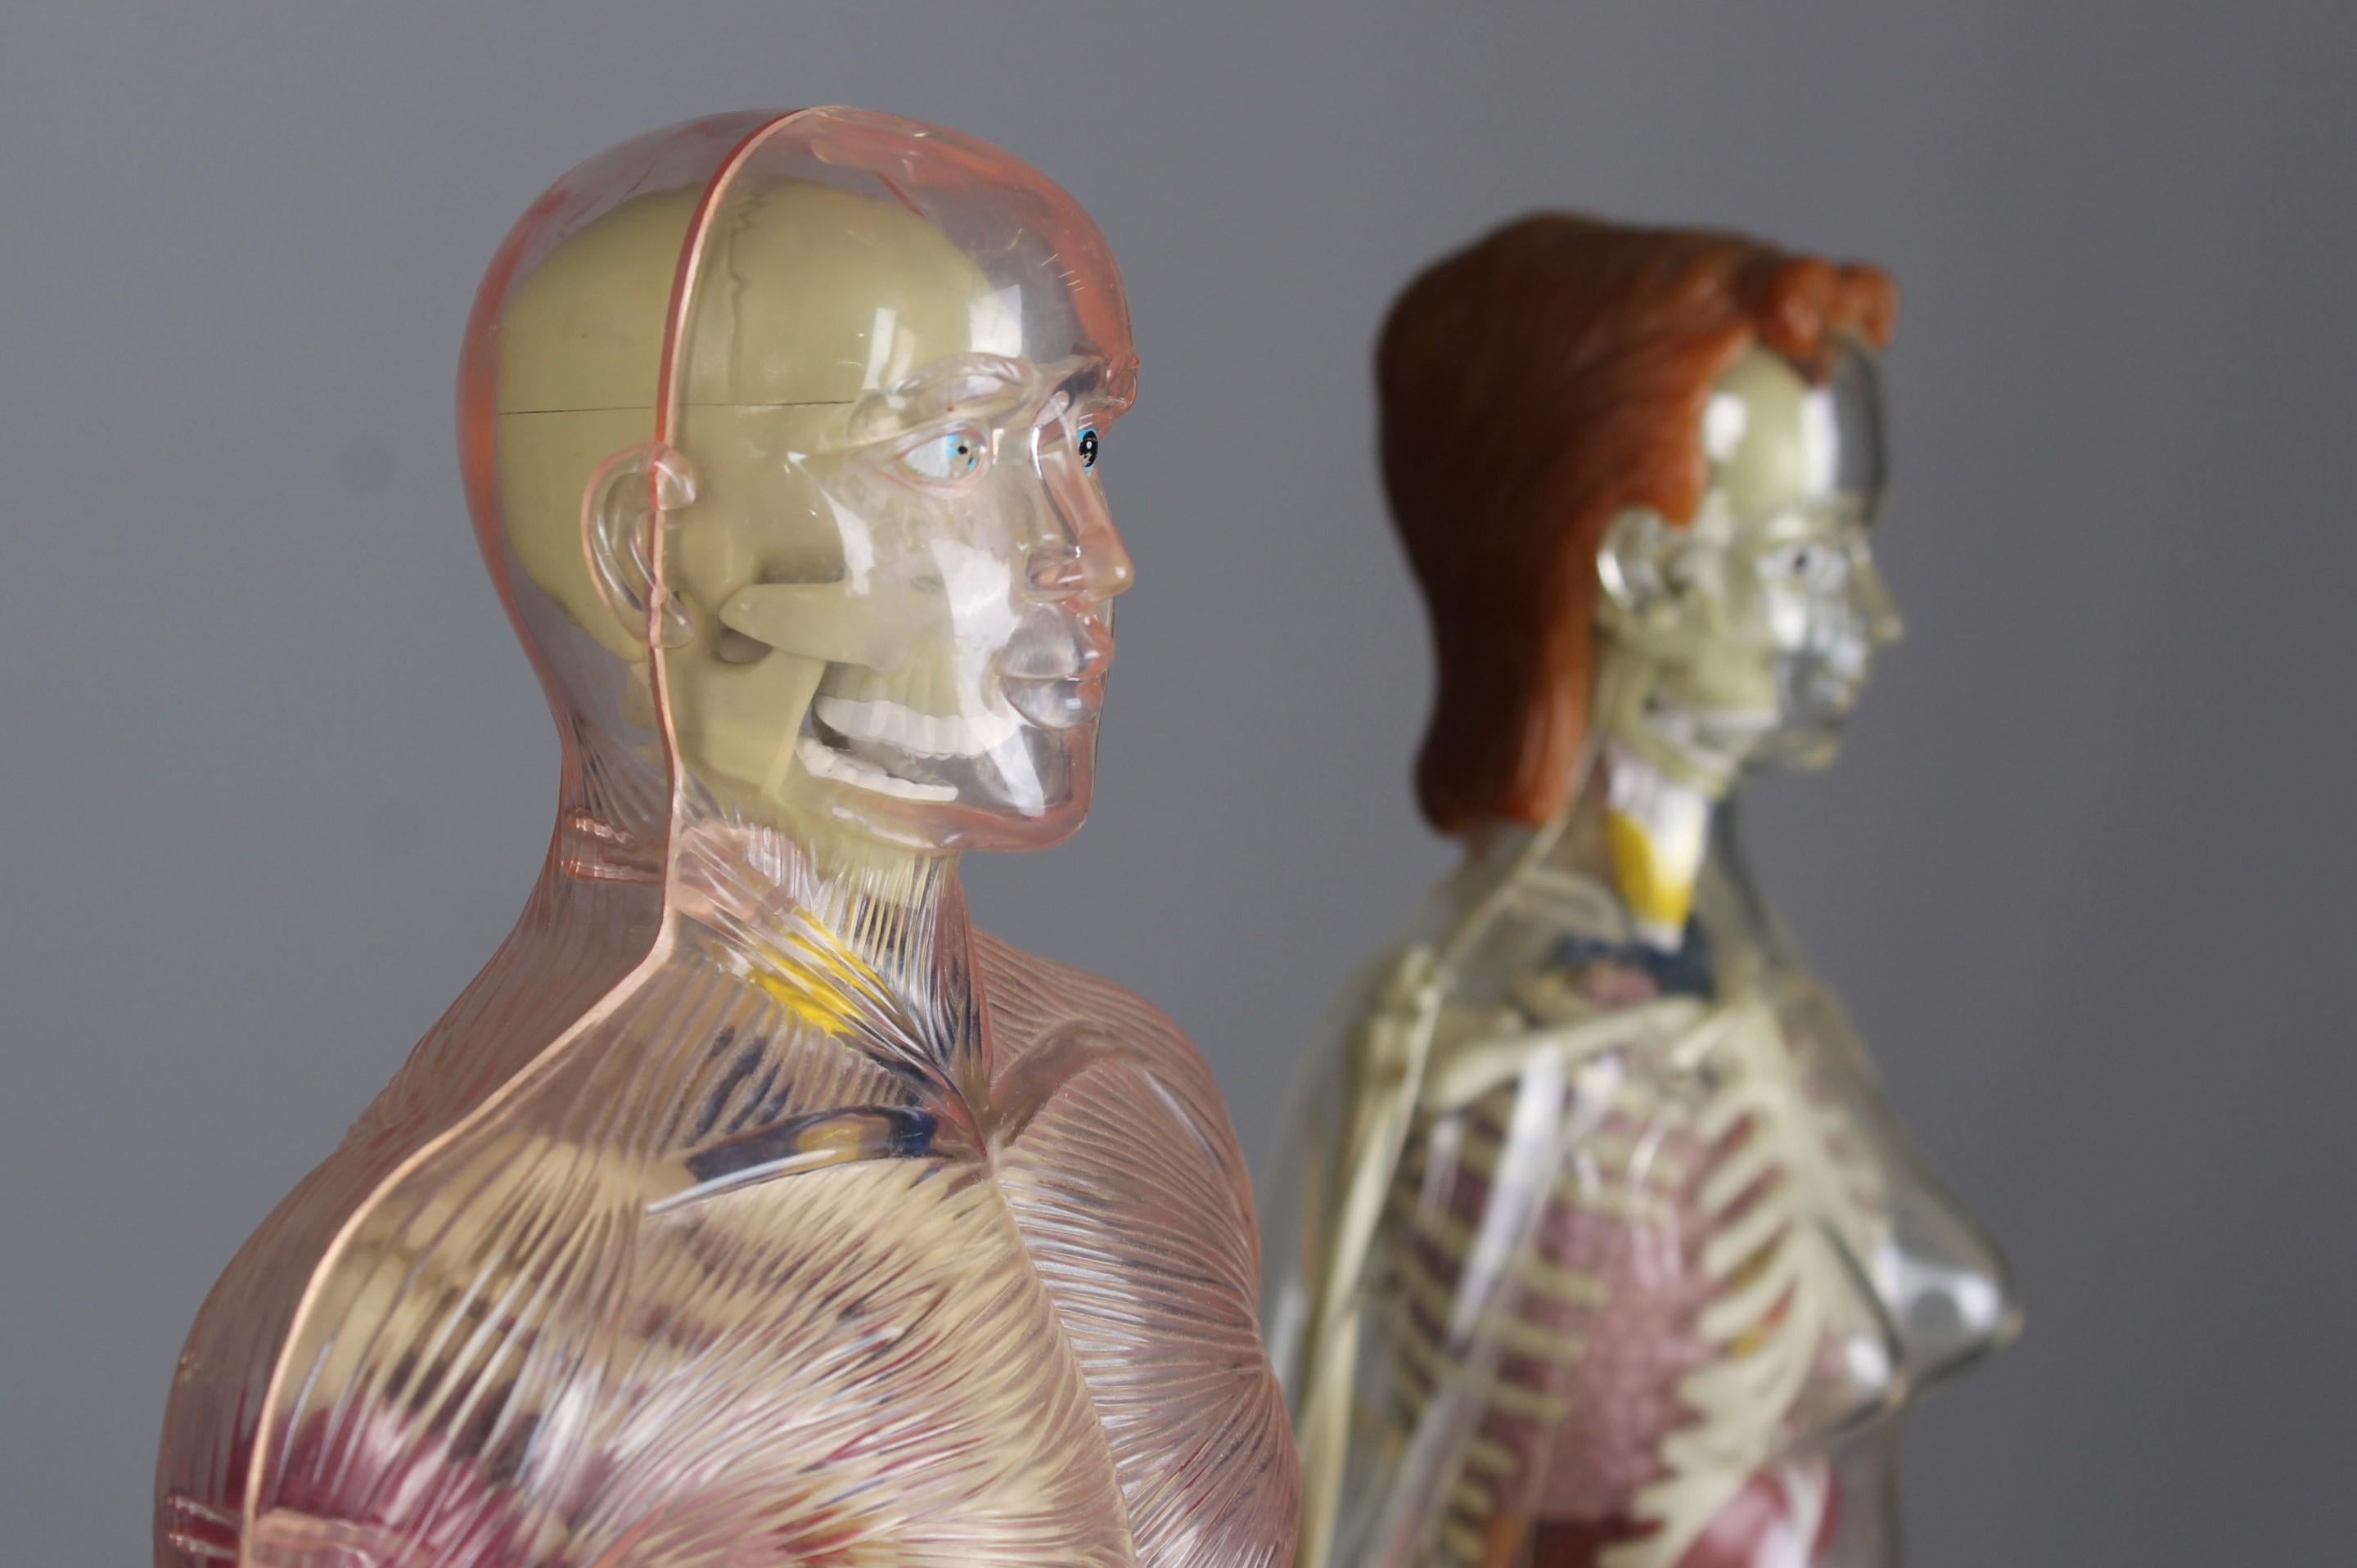 Exceptional Human Anatomy Model from the 80s, 90s.
Male and Female Figures on a black stand.
The outer casting, such as the individual intestines are removable parts.
